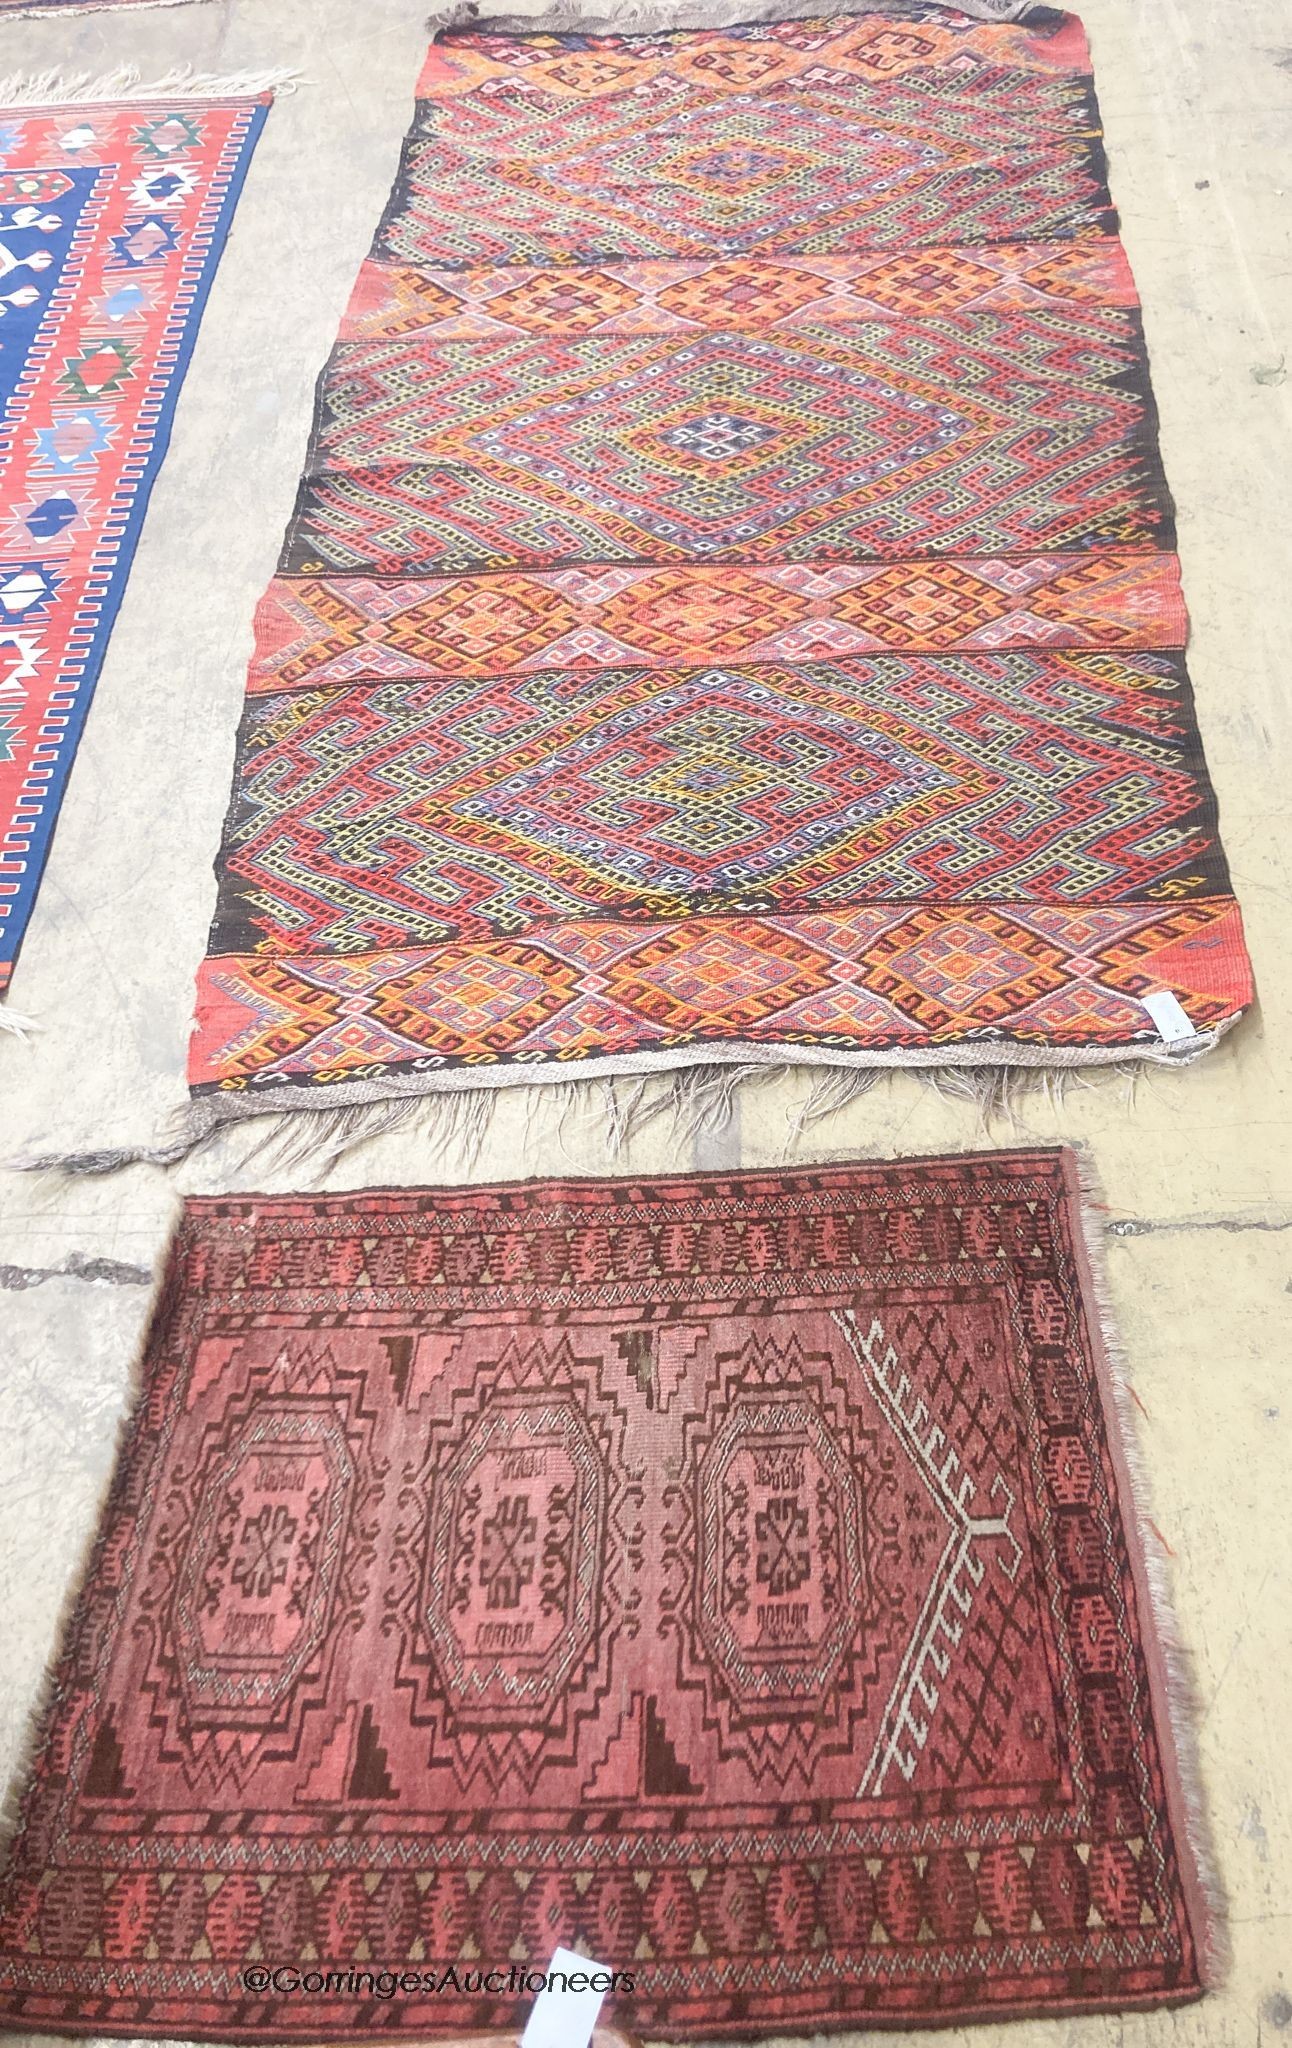 A polychrome flatweave geometric rug, 240 x 124cm together with a smaller Bokhara rug